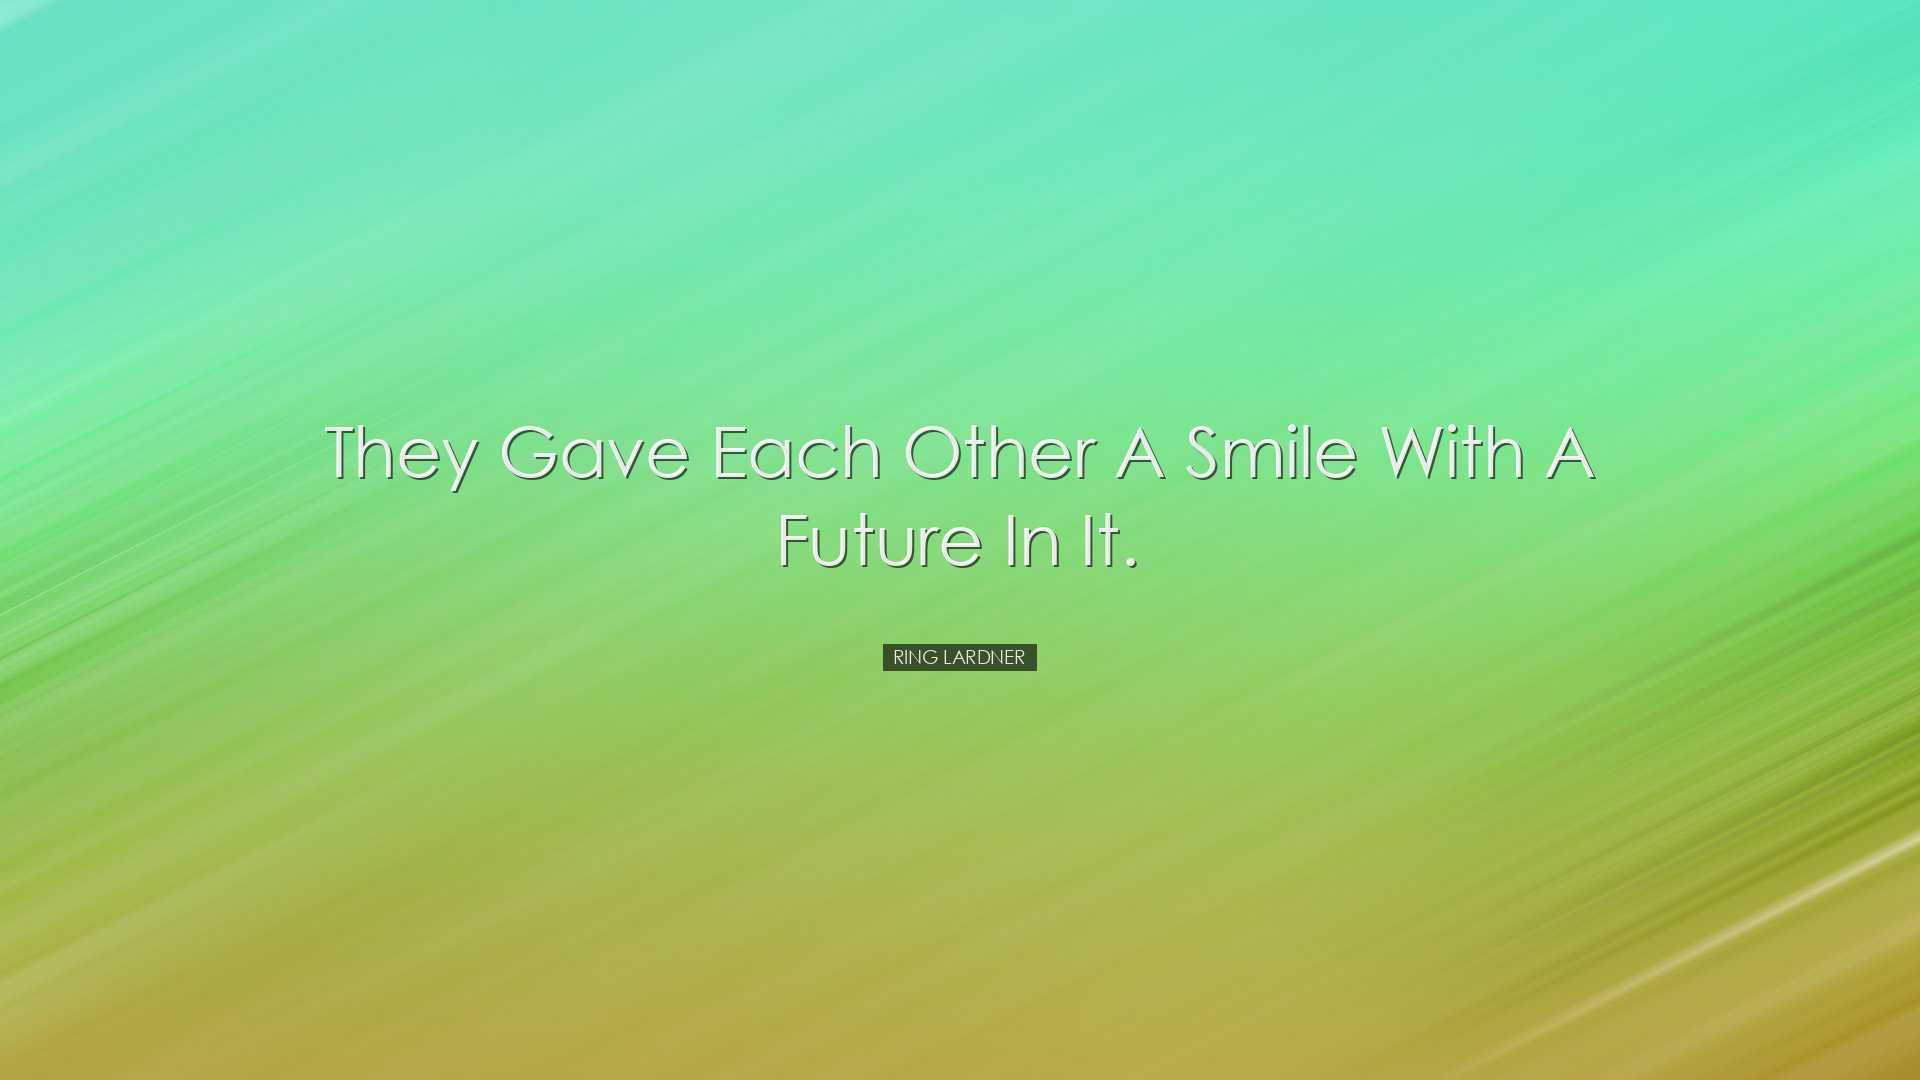 They gave each other a smile with a future in it. - Ring Lardner